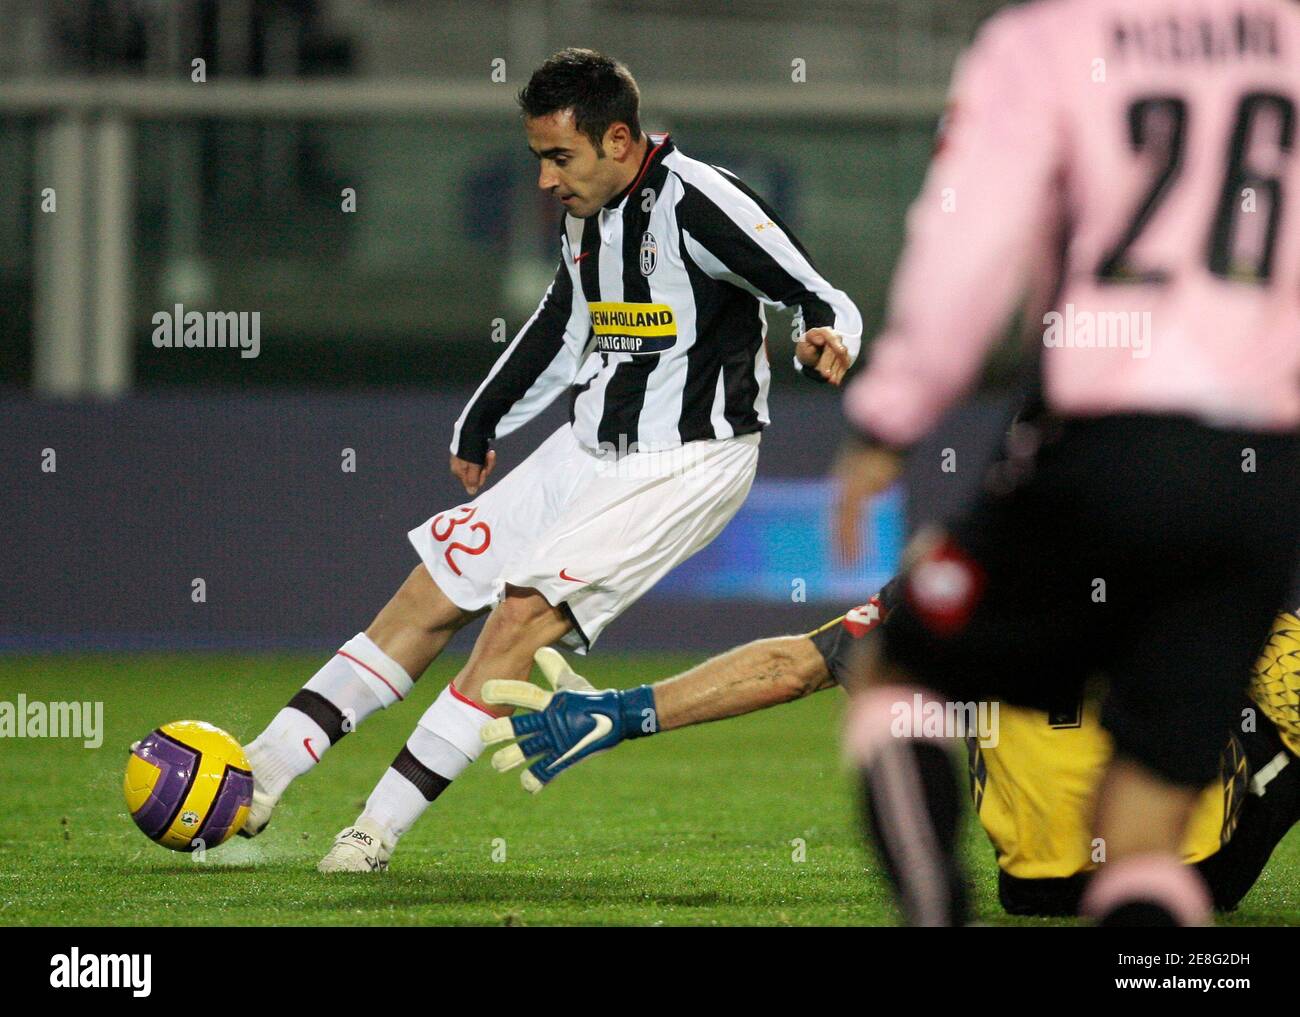 Juventus' Marco Marchionni shoots and scores a fourth goal against Palermo during their Italian Serie A soccer match at the Olympic stadium in Turin November 25, 2007.  REUTERS/Alessandro Garofalo (ITALY) Stock Photo